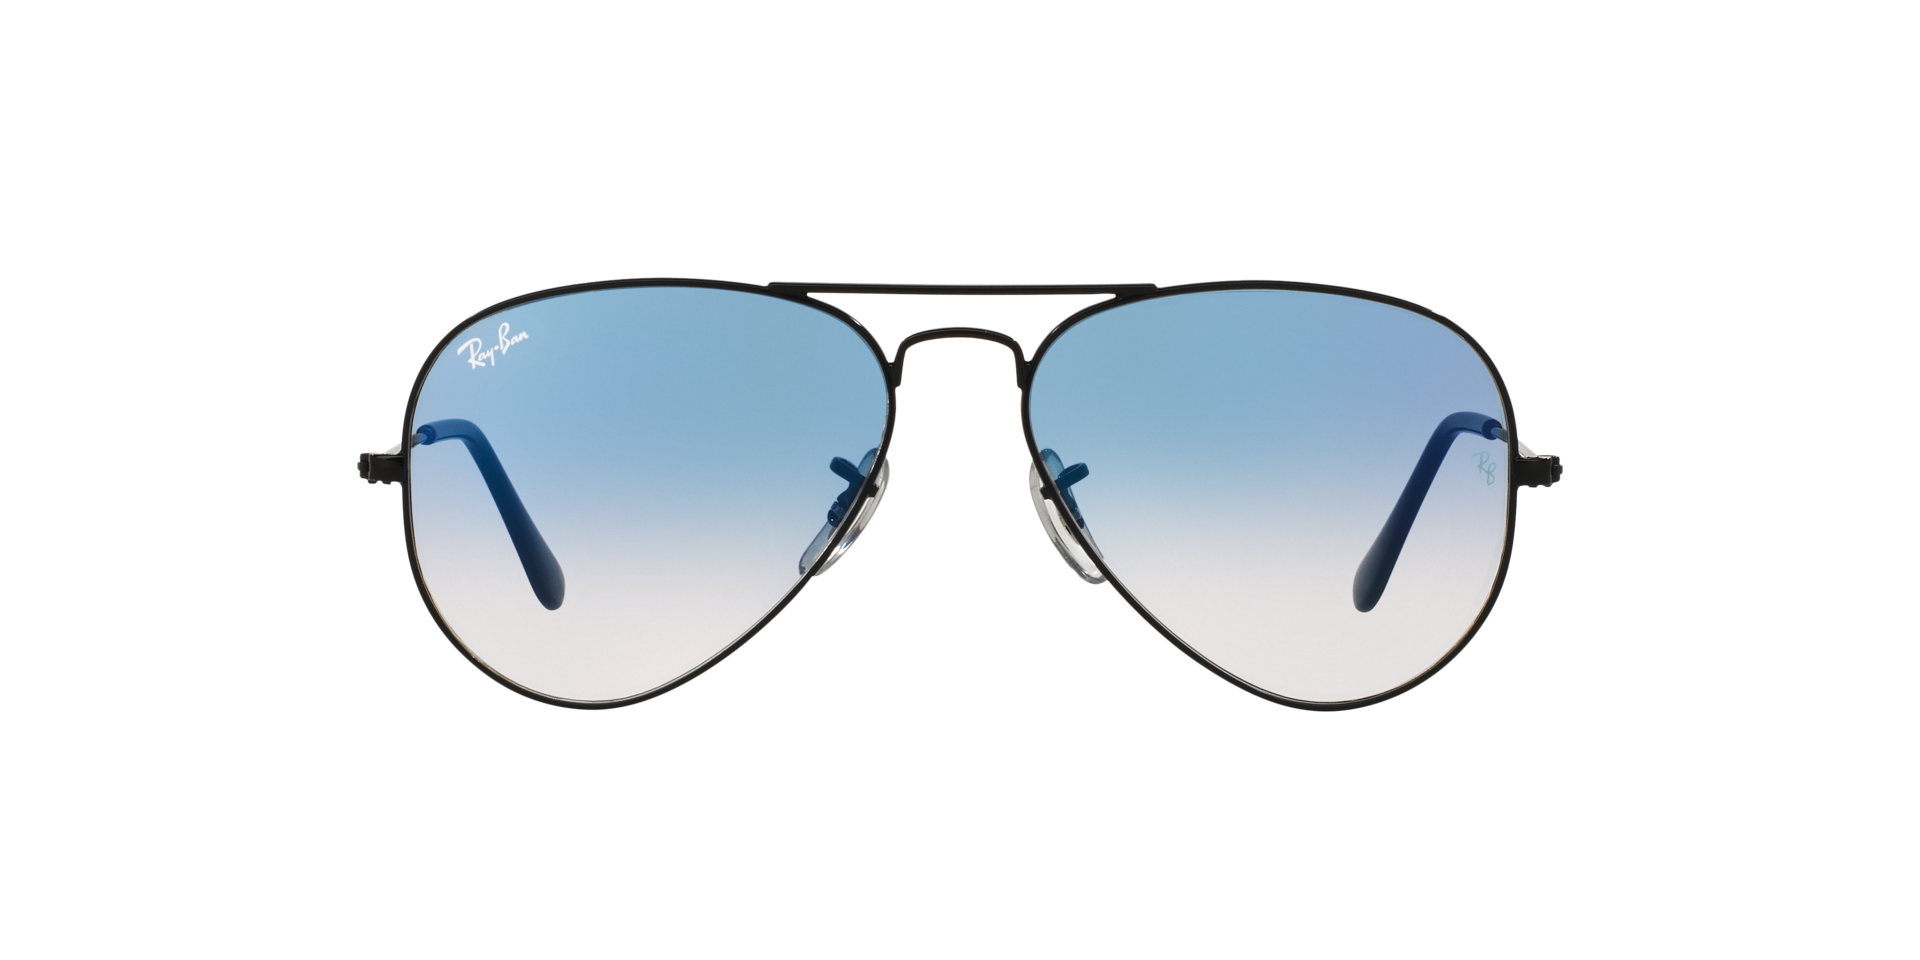 Share more than 152 blue sunglasses online